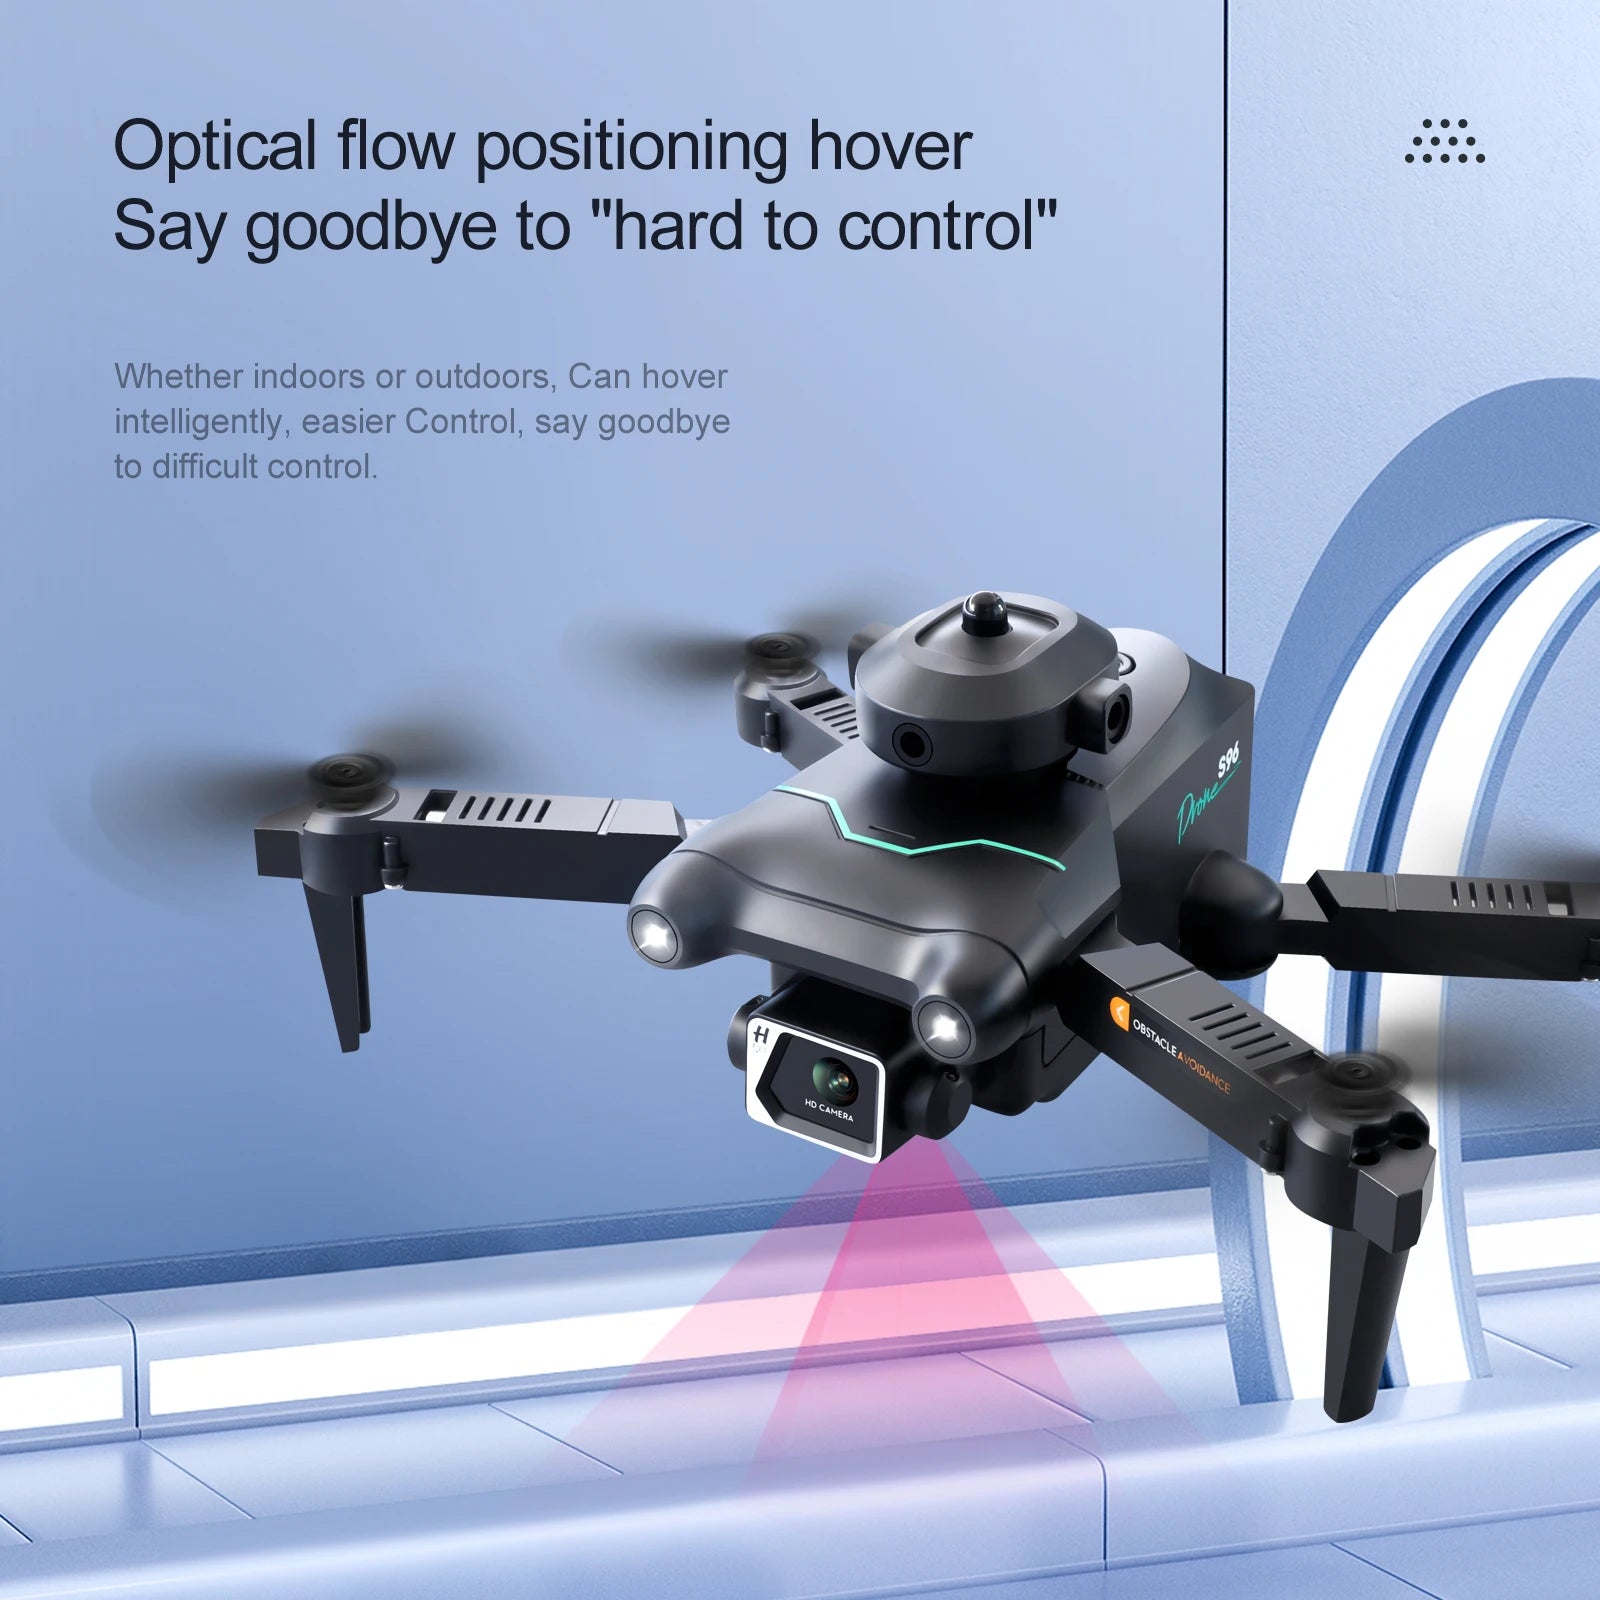 optical flow positioning can hover intelligently, easier control, say goodbye to